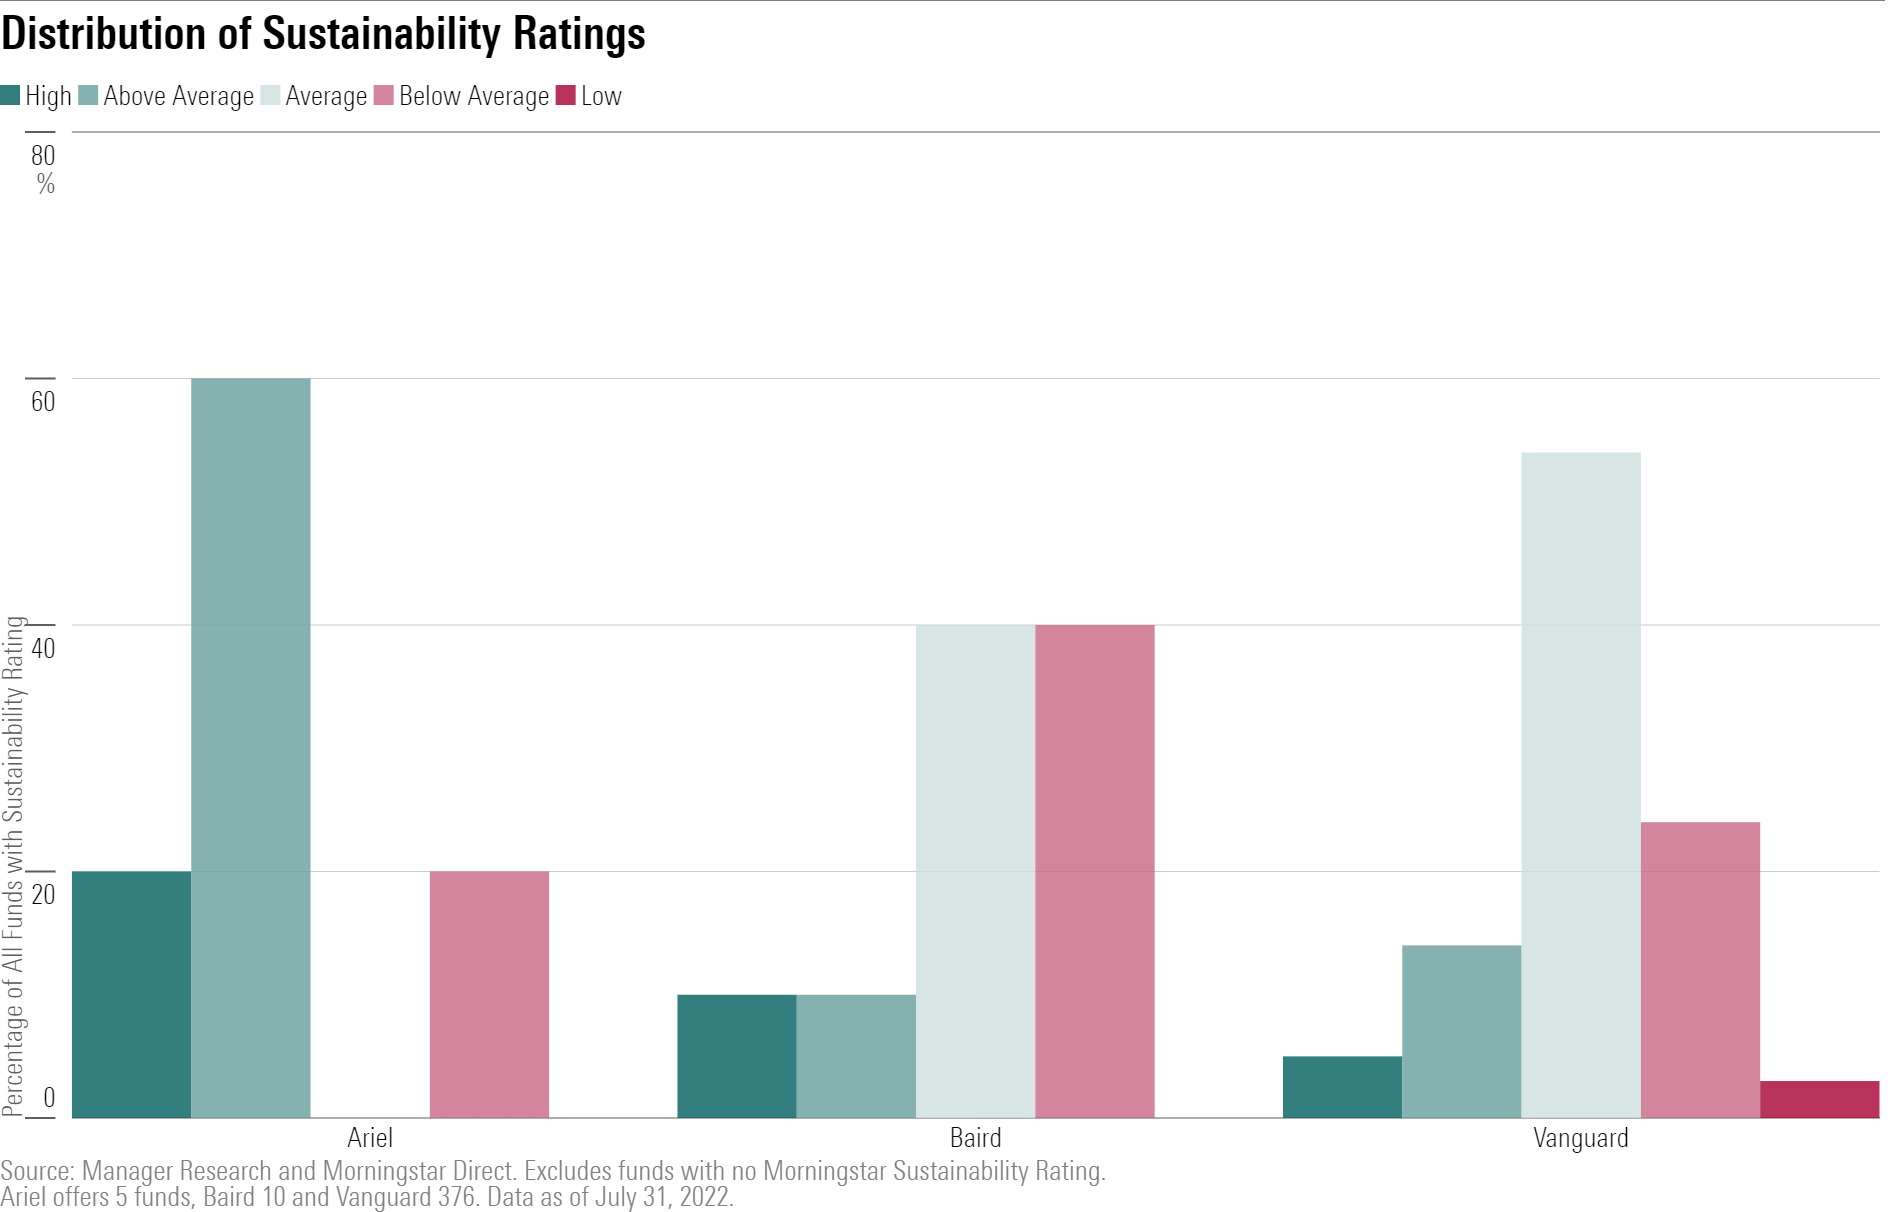 A bar chart of the distribution of Morningstar Sustainability Ratings for Ariel, Baird, and Vanguard.